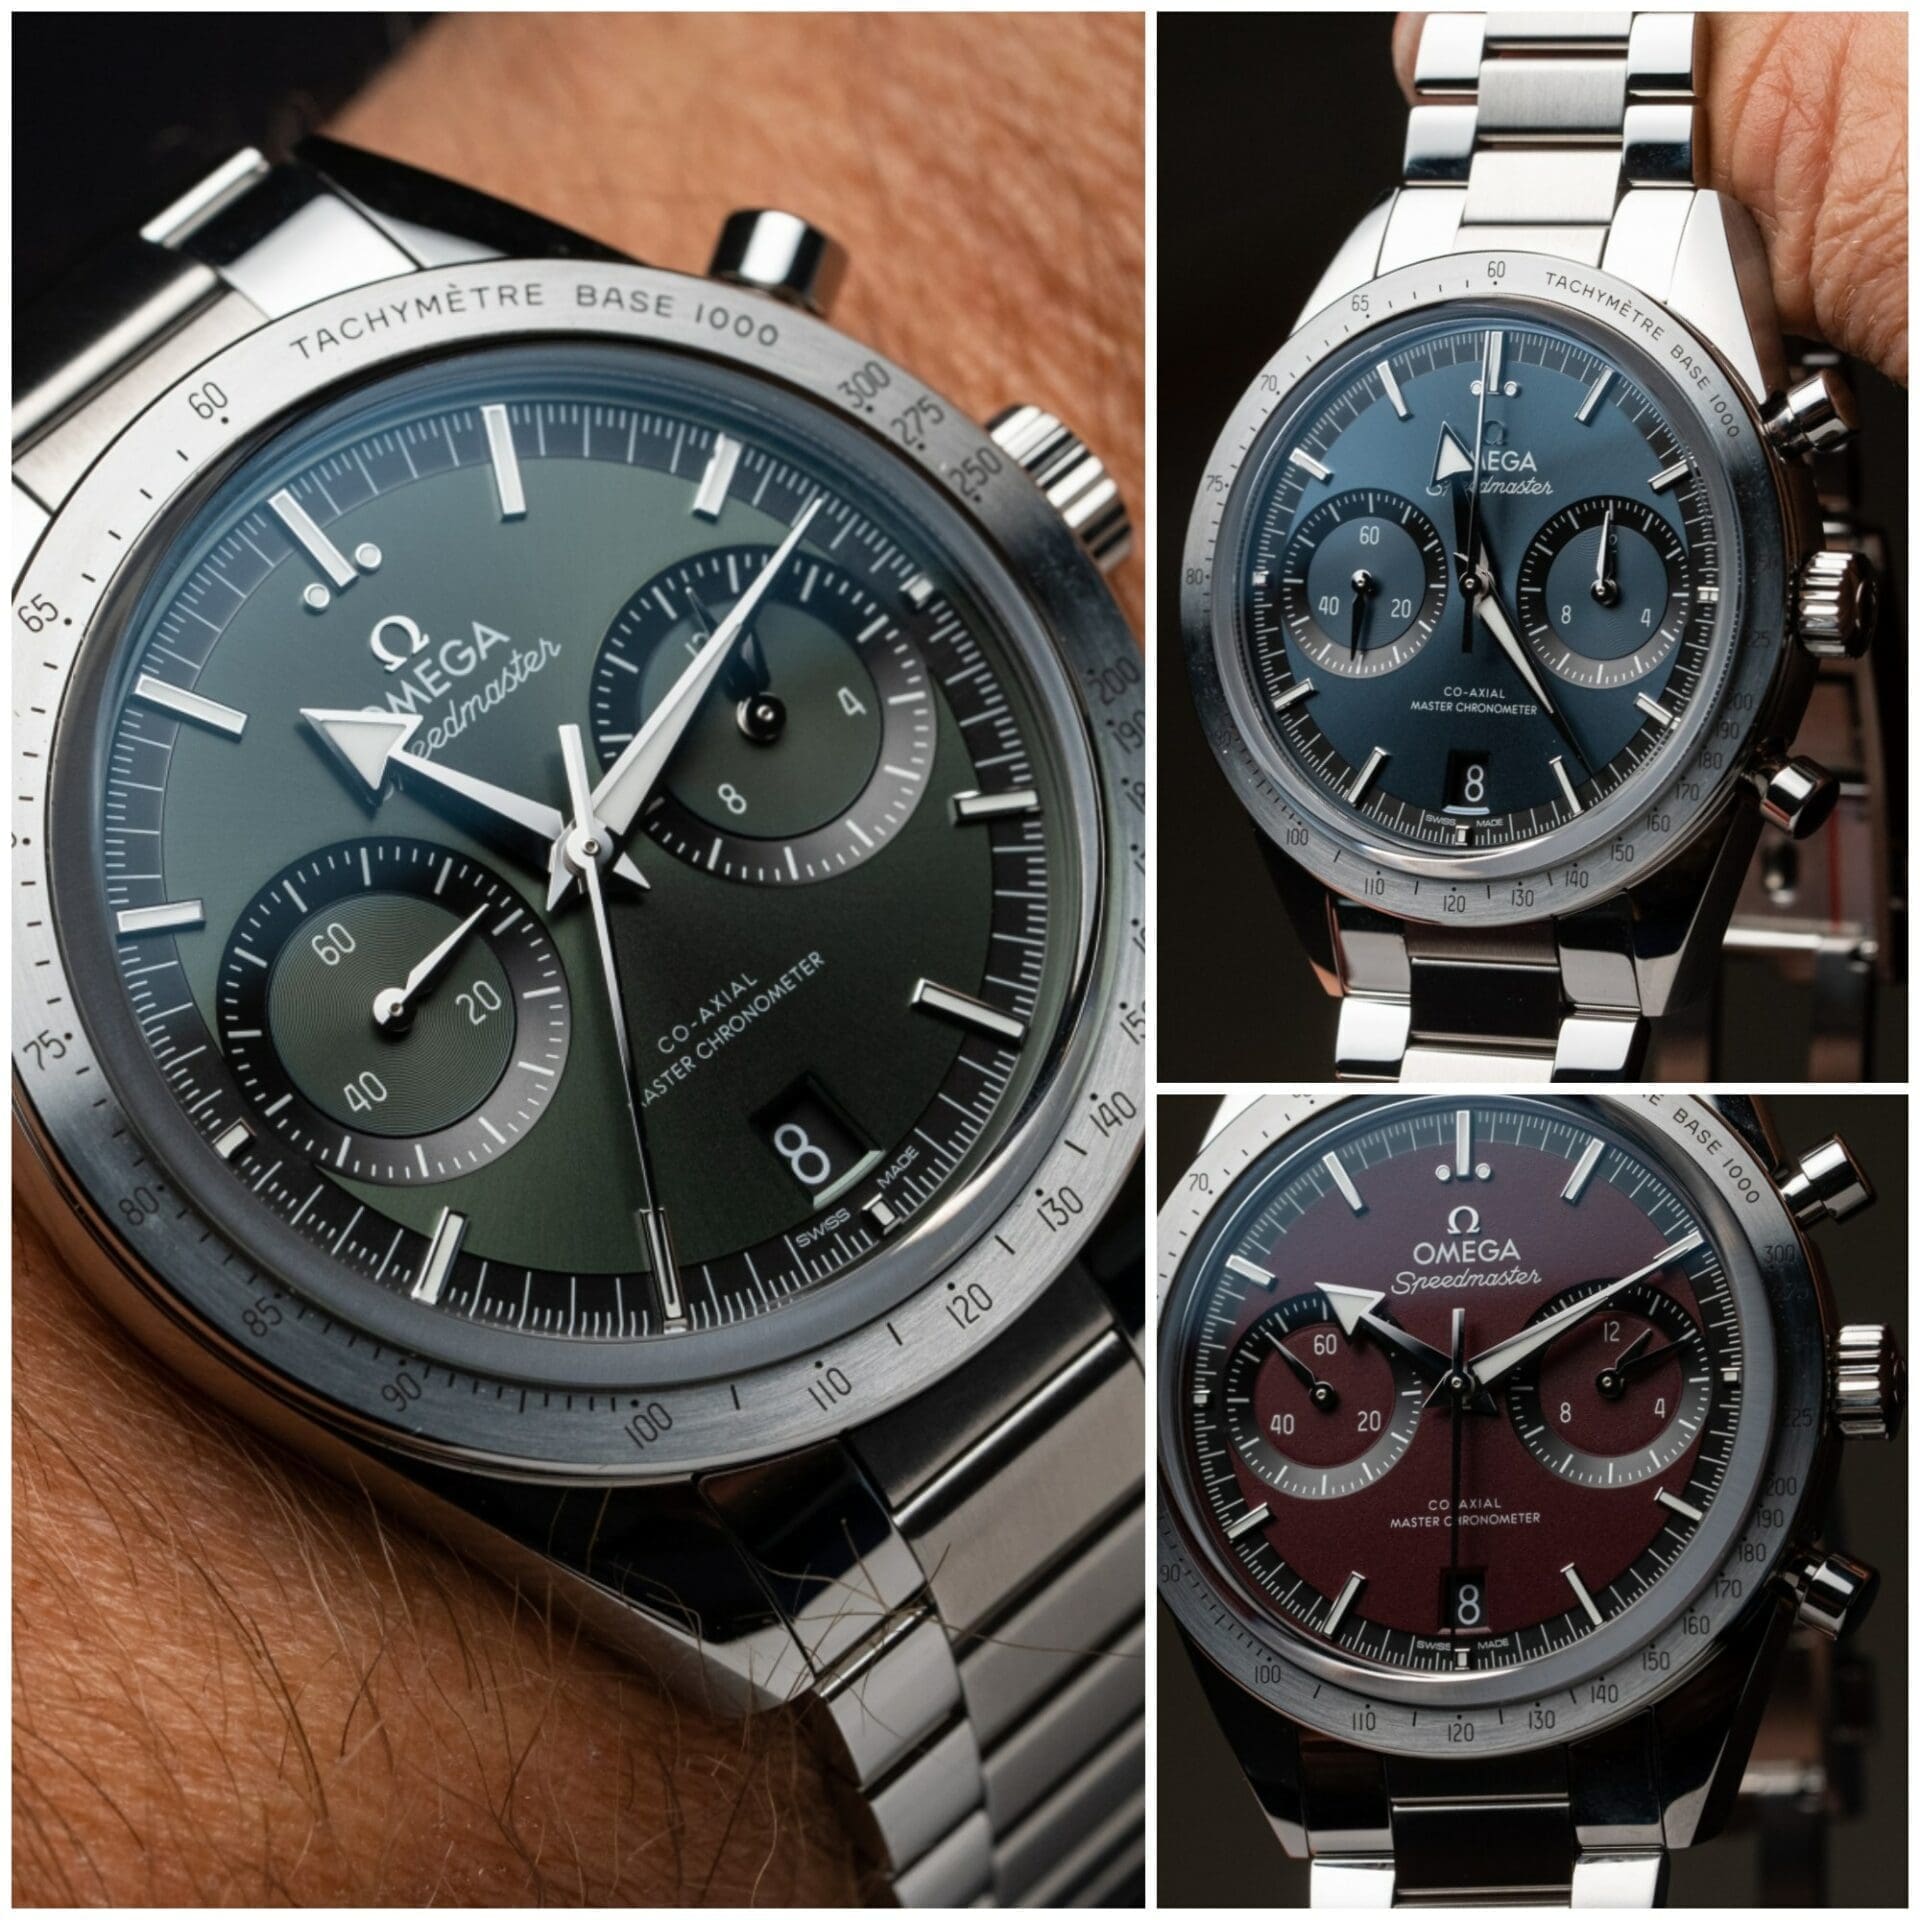 VIDEO: The Omega Speedmaster ’57 is a funtastic take on a classic